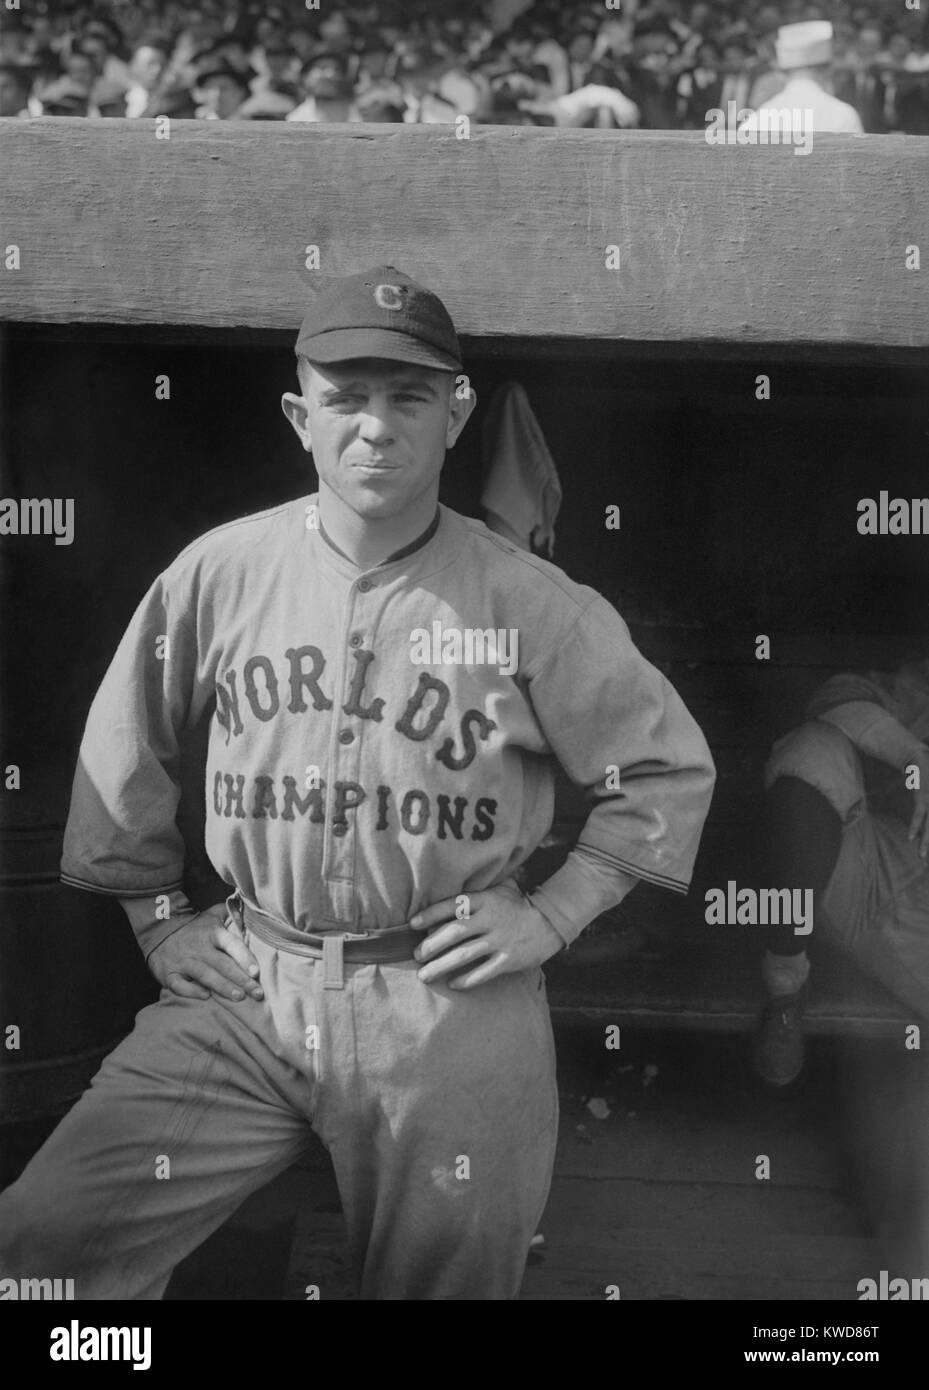 Joe Sewell wearing a uniform celebrating the Cleveland Indians winning of the 1920 World Series. (BSLOC 2015 17 13) Stock Photo